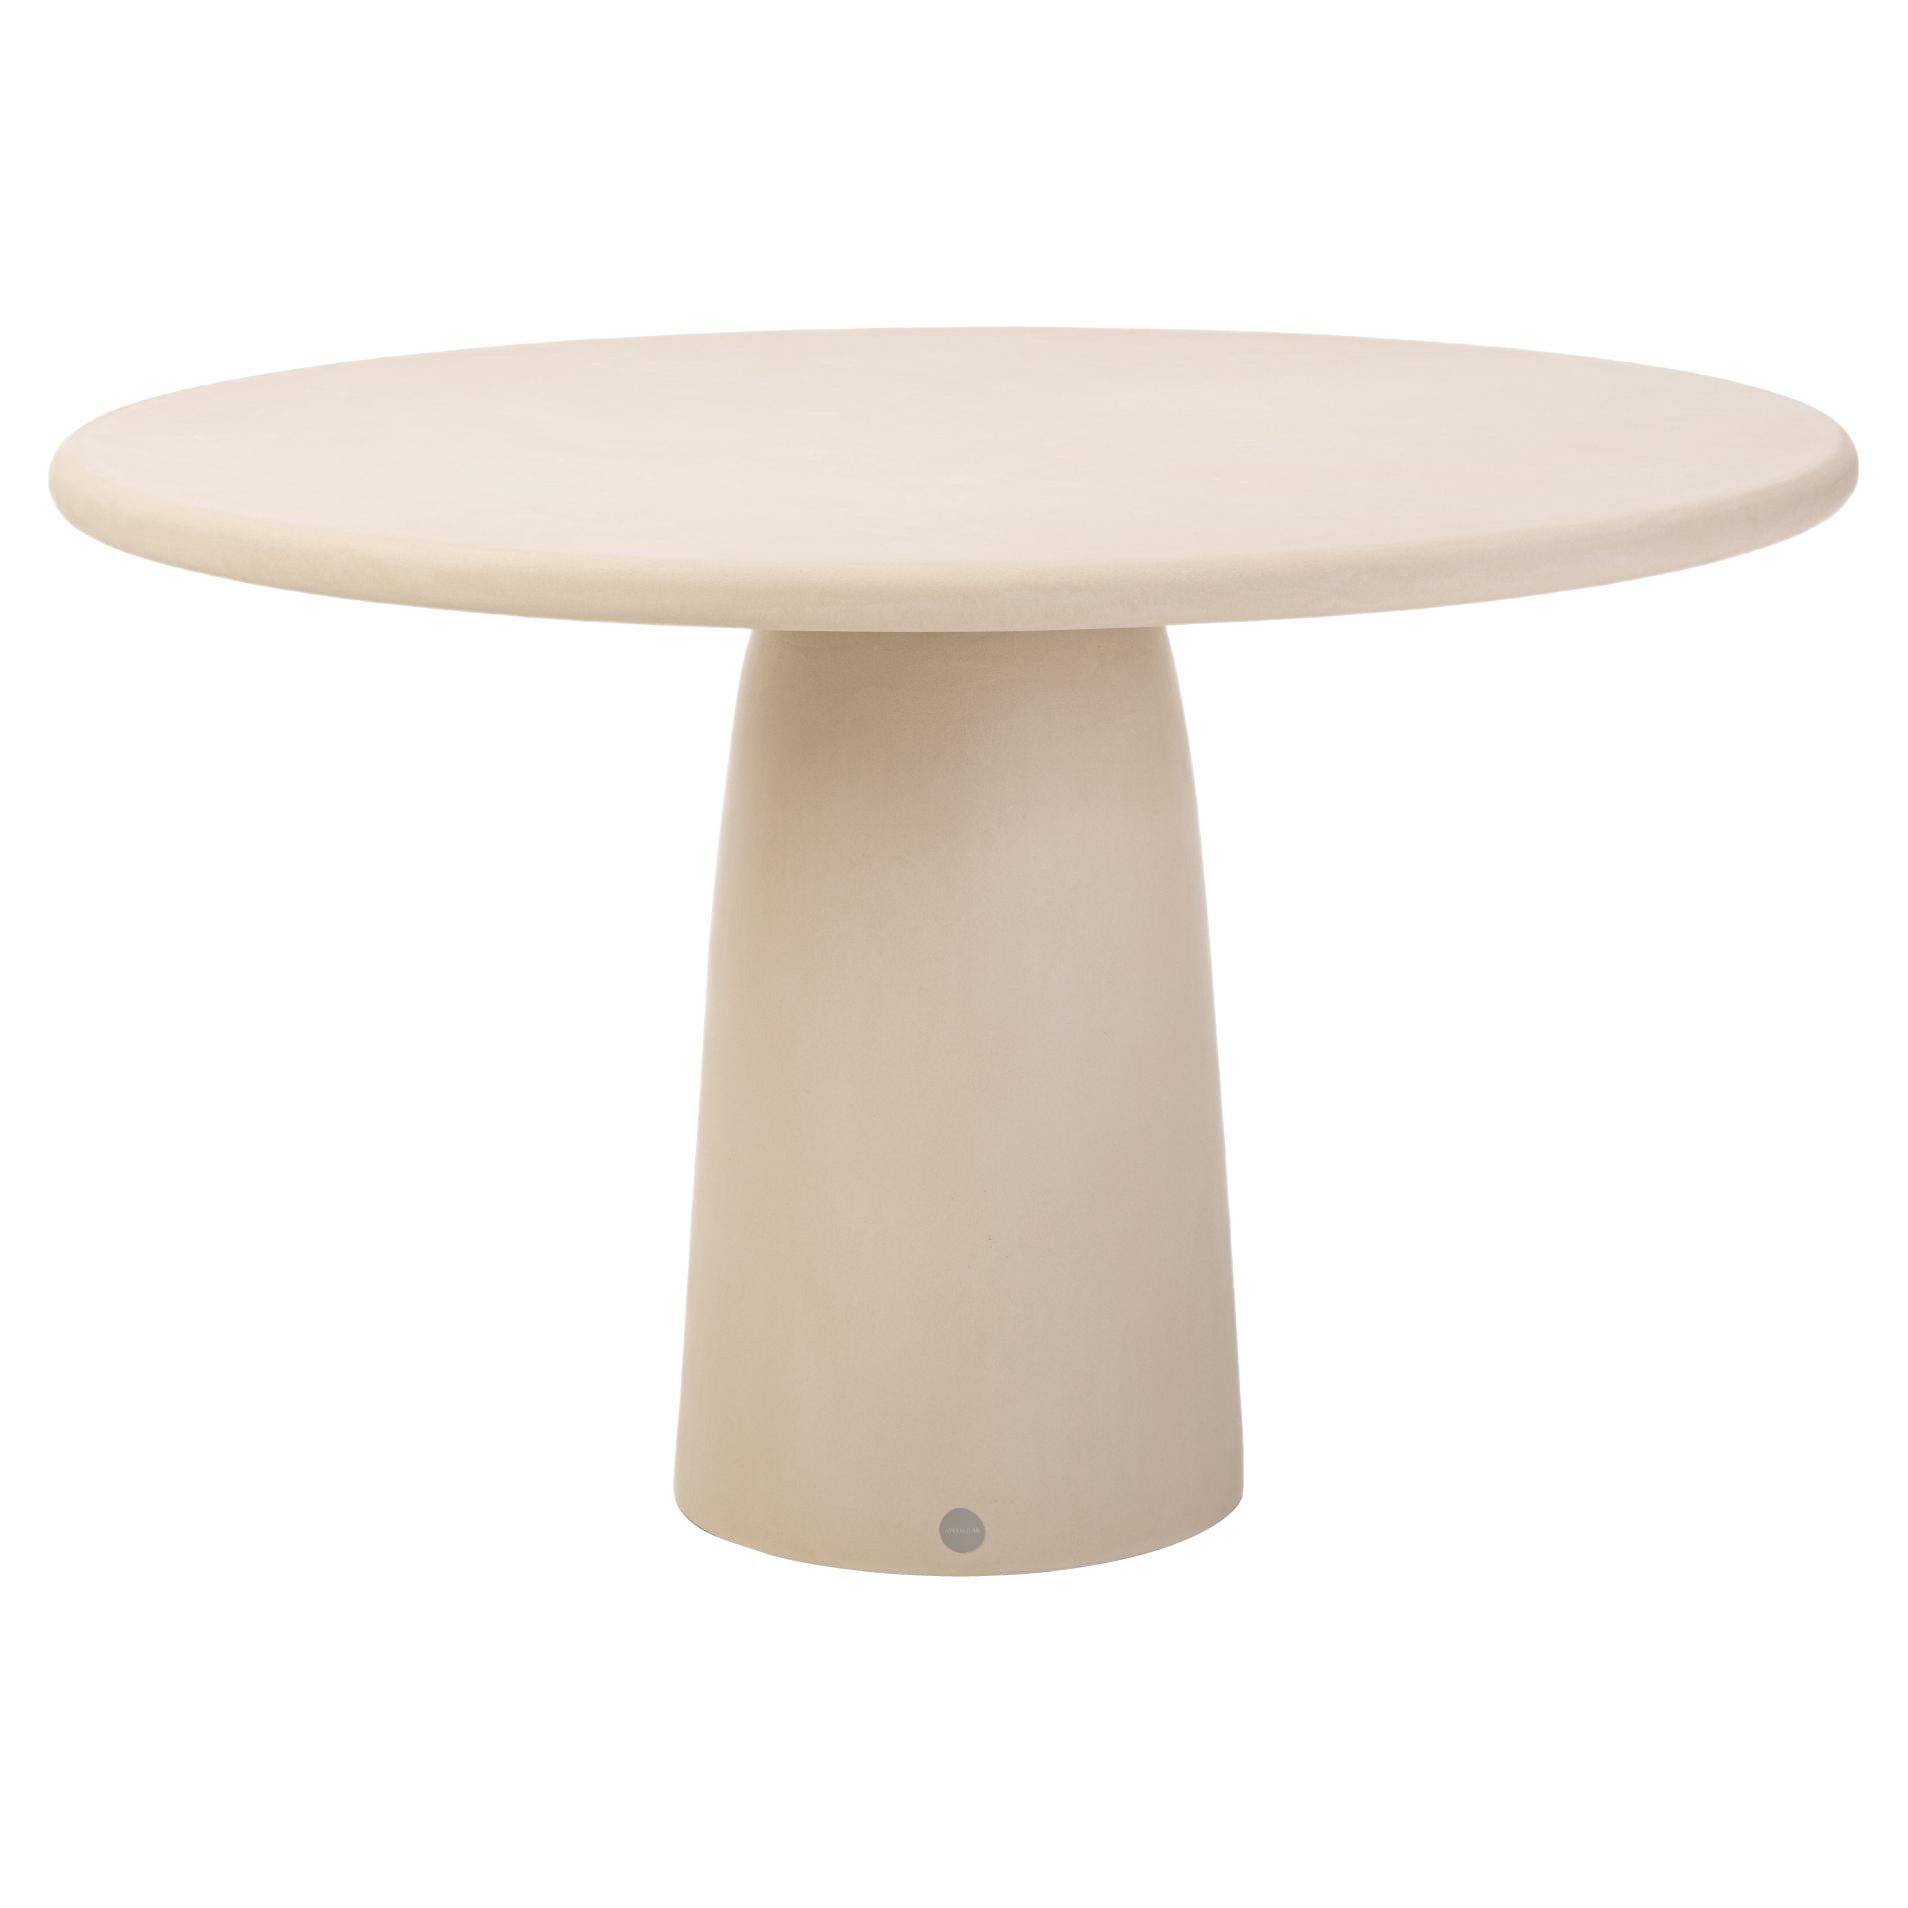 Round Natural Plaster Dining Table "Menhir" 140 by Isabelle Beaumont For Sale